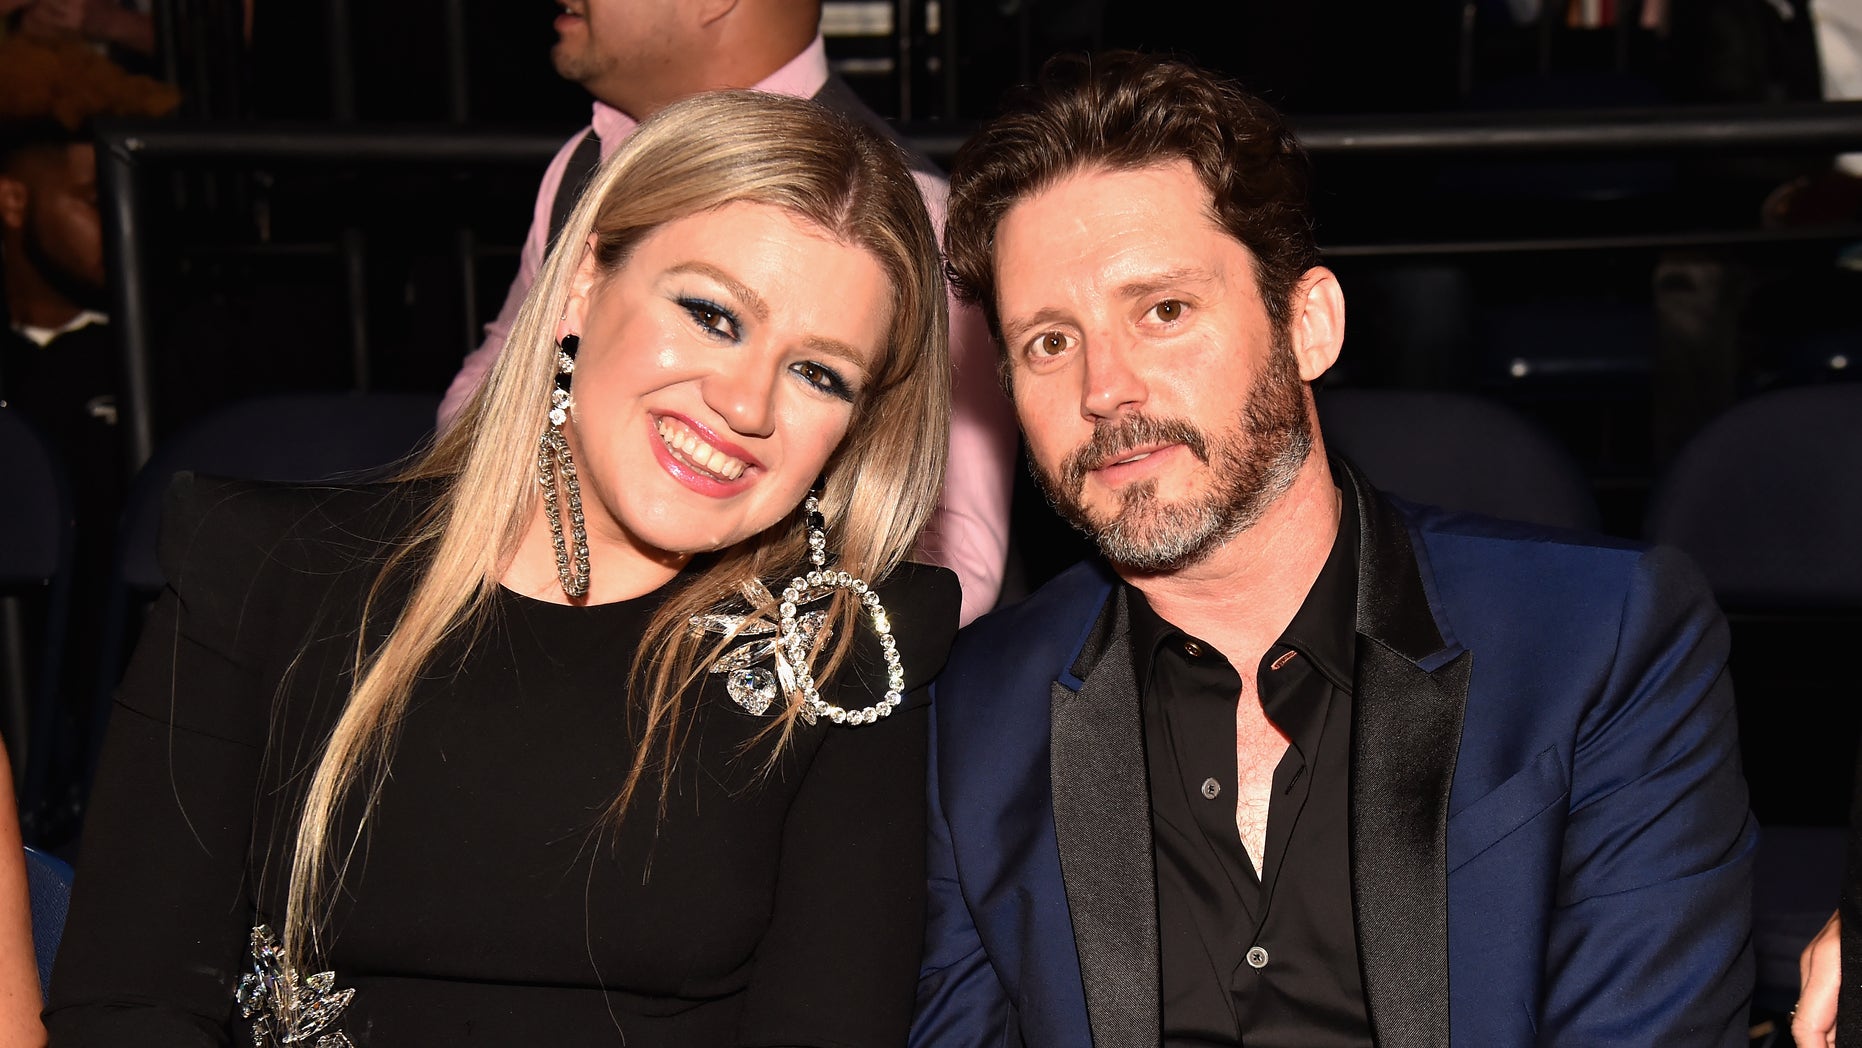 Kelly Clarkson's husband pulls sweet prank during live stage performance | Fox News